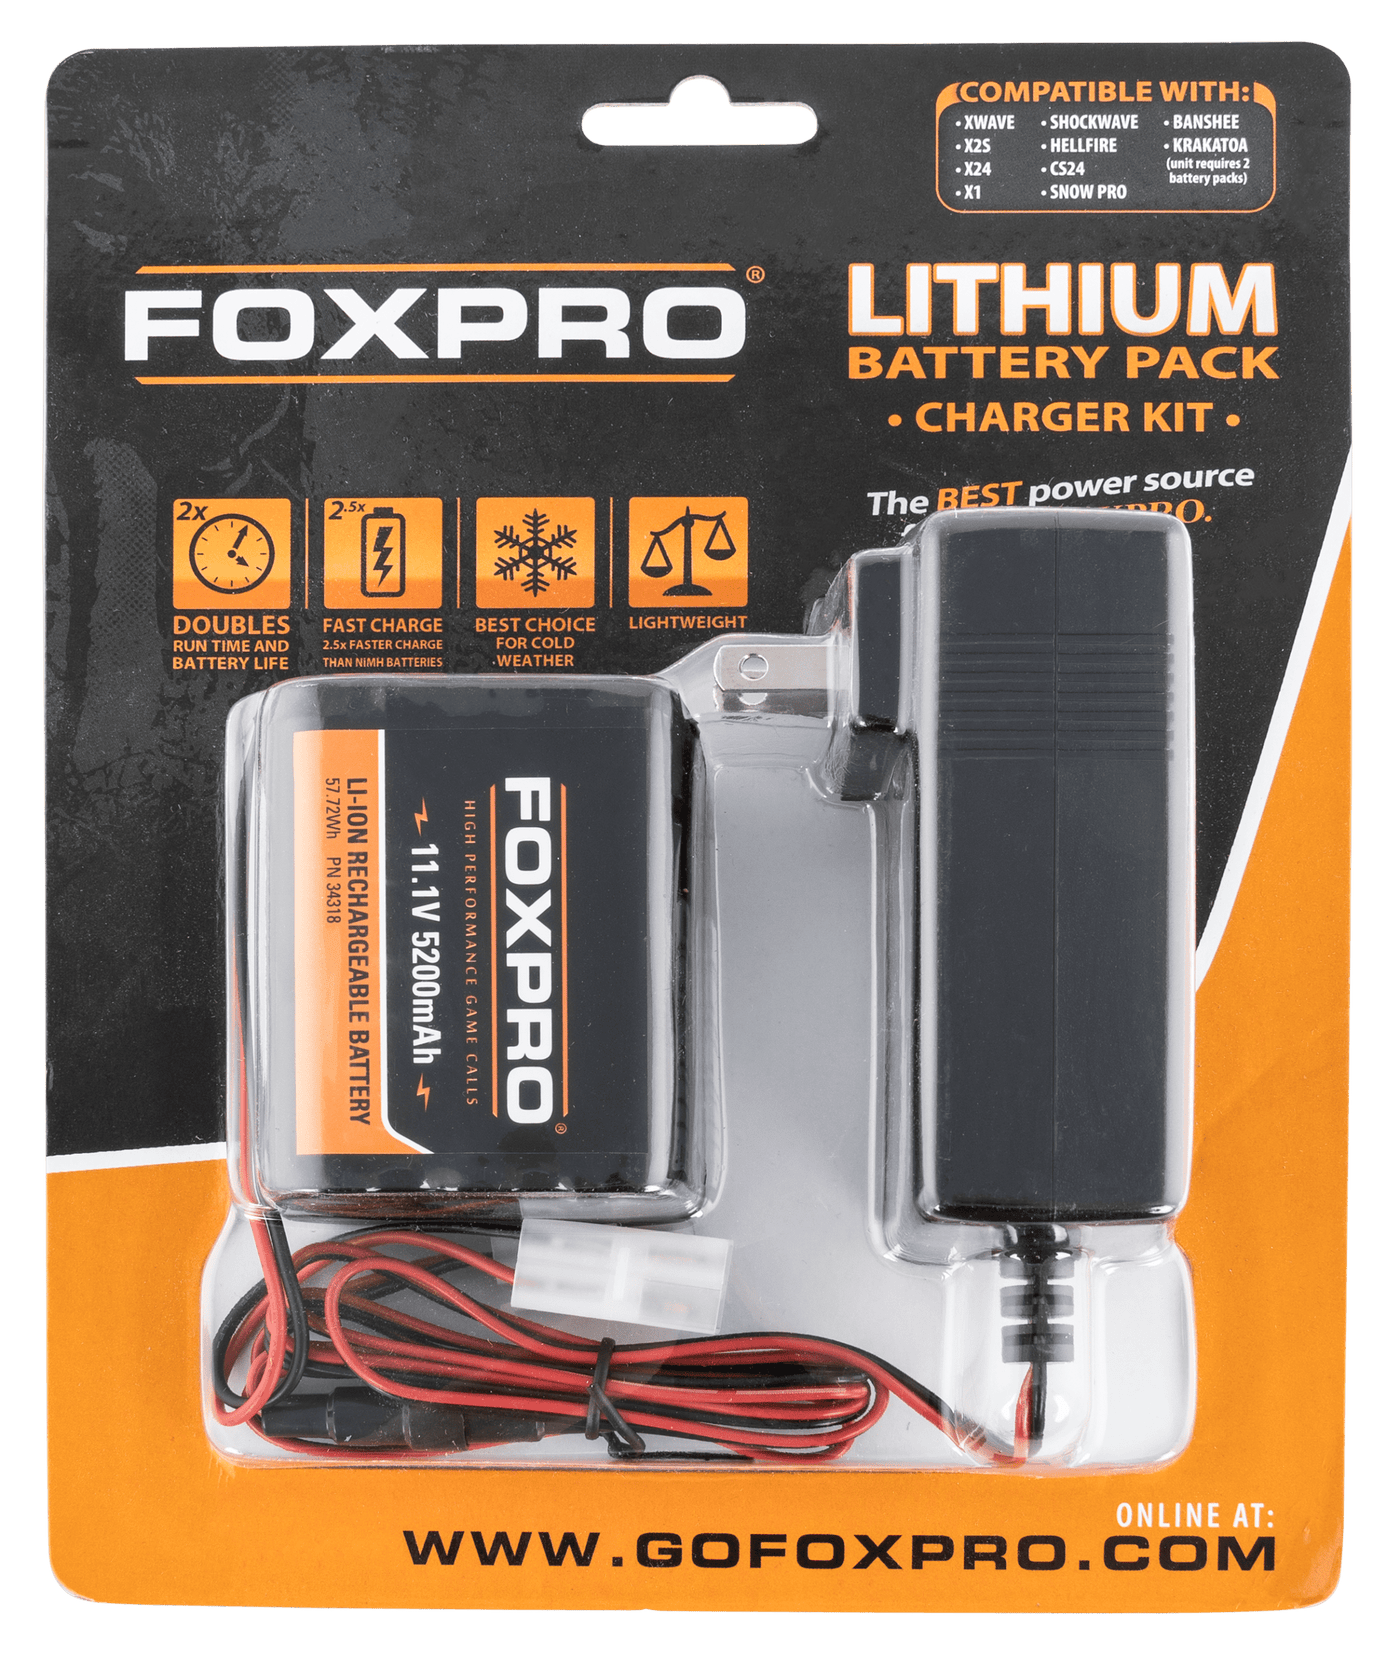 Foxpro Foxpro Lithium Battery Pack, Foxpro Lith/chg        Lithium 10 Cell Fast Ch Accessories